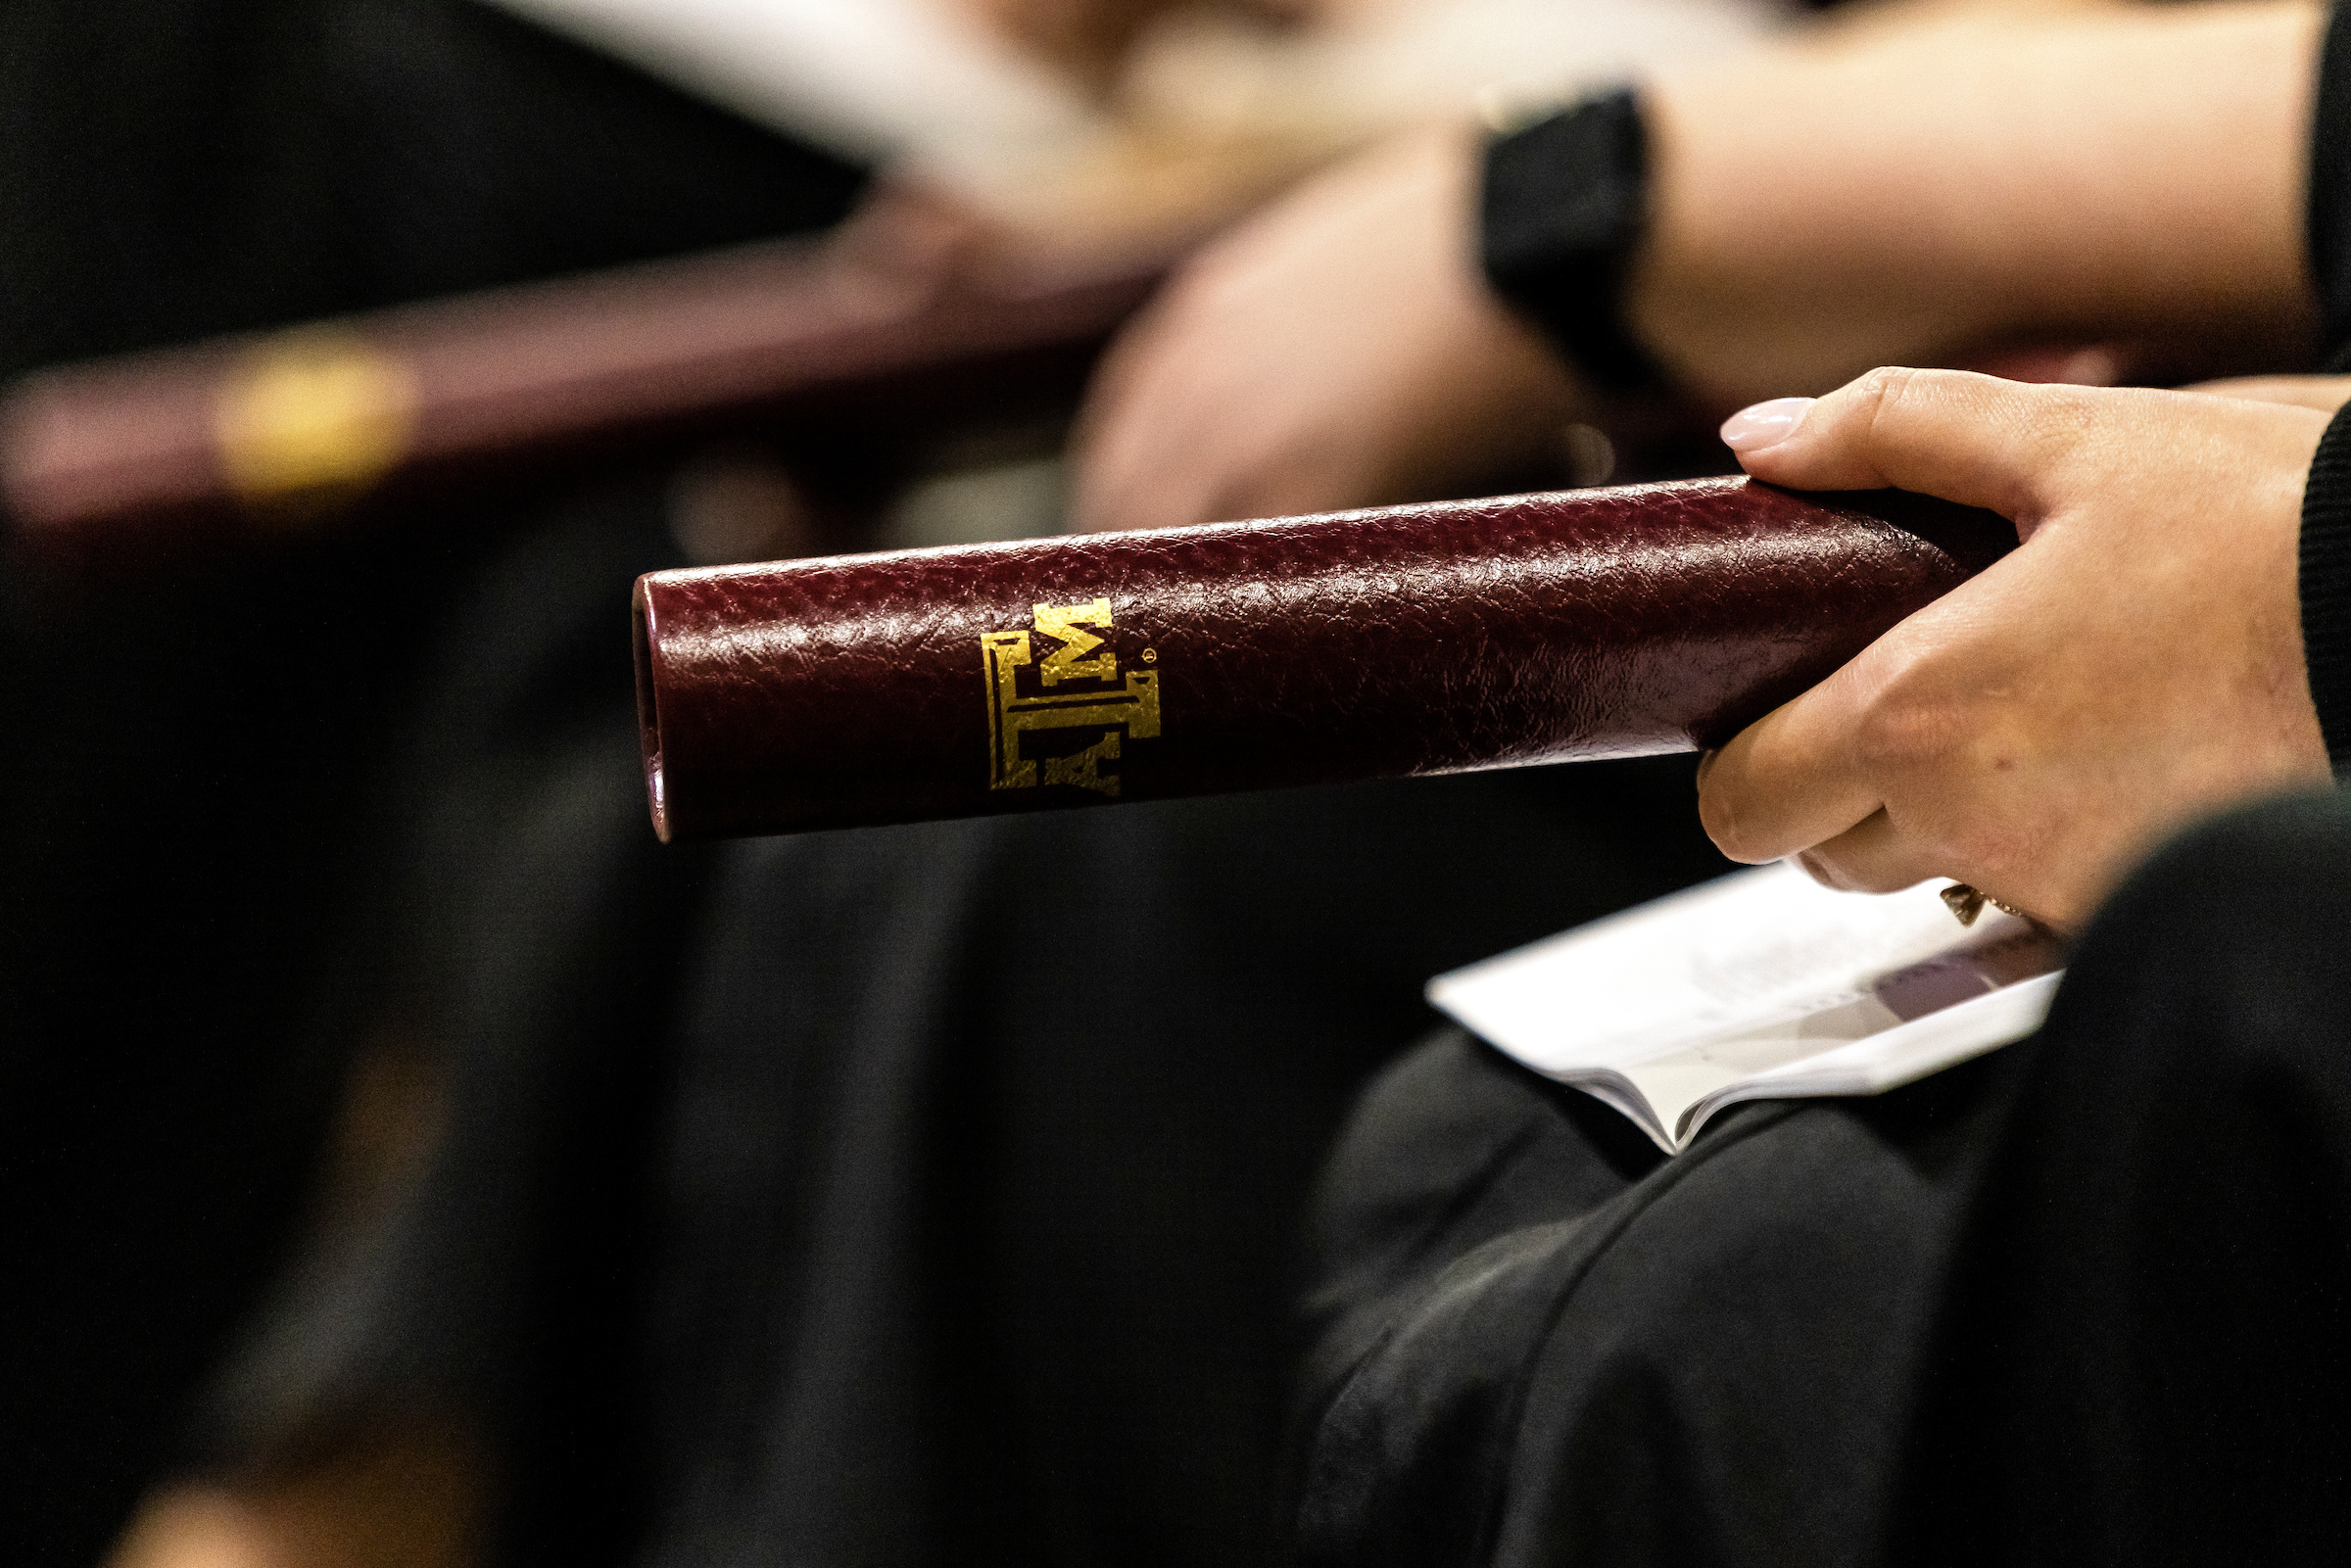 Image of a students hand with their Aggie ring on